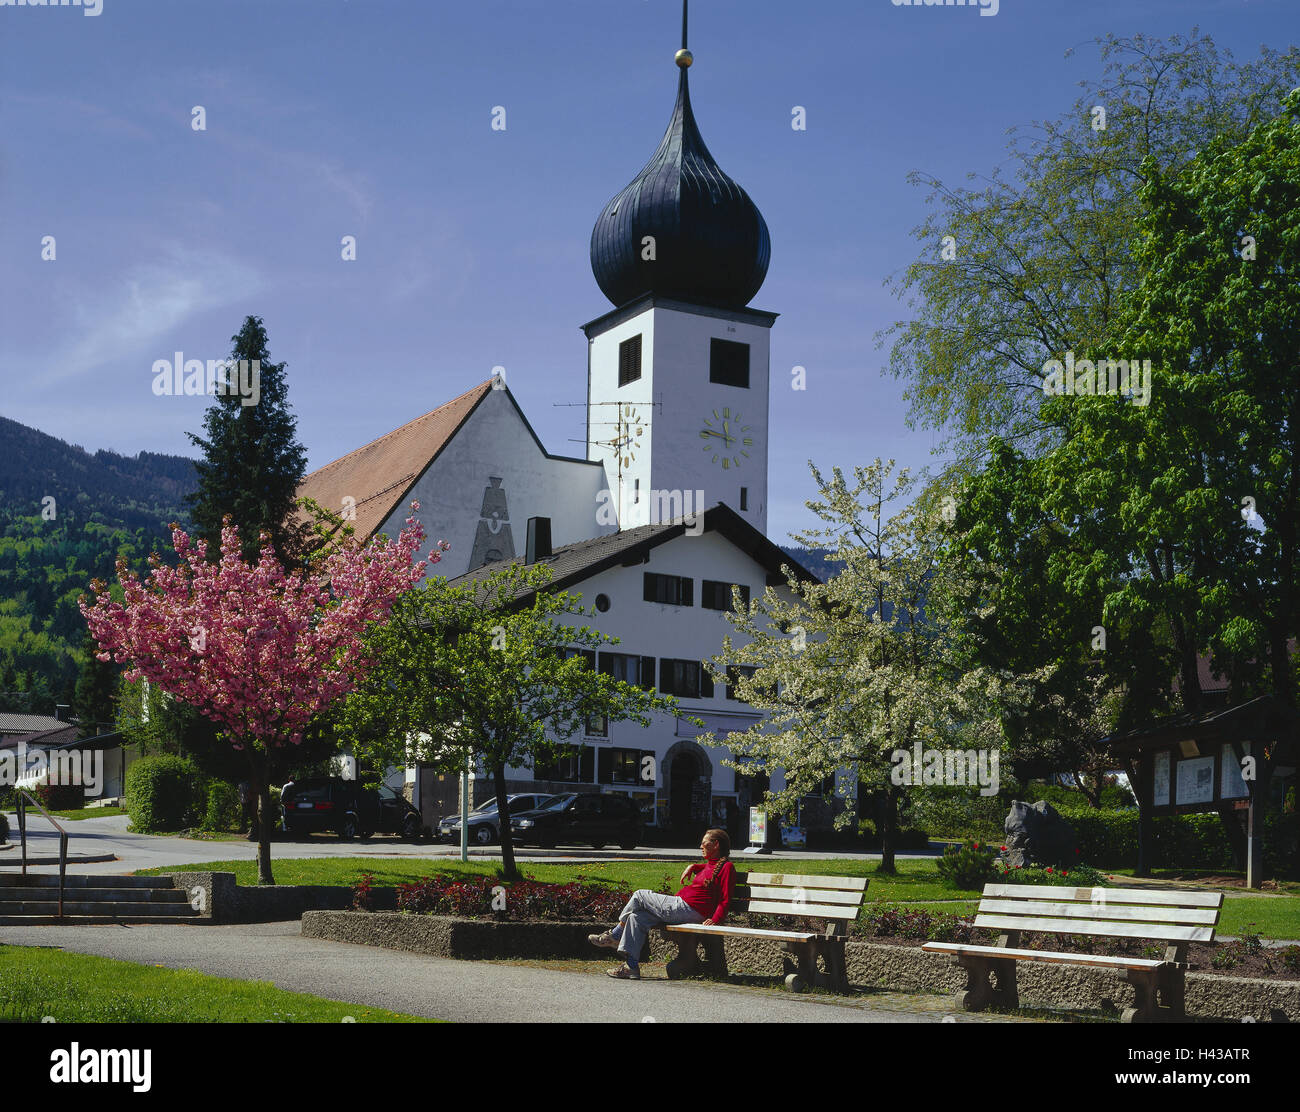 Germany, Upper Bavaria, bath Brook Feiln, Church, Park-benches, Spring, Tourist, South Germany, Bavaria, place, church, sacred construction, building, structure, architecture, faith, religion, Christianity, steeple, bulbous spire, trees, blossom, people, Stock Photo